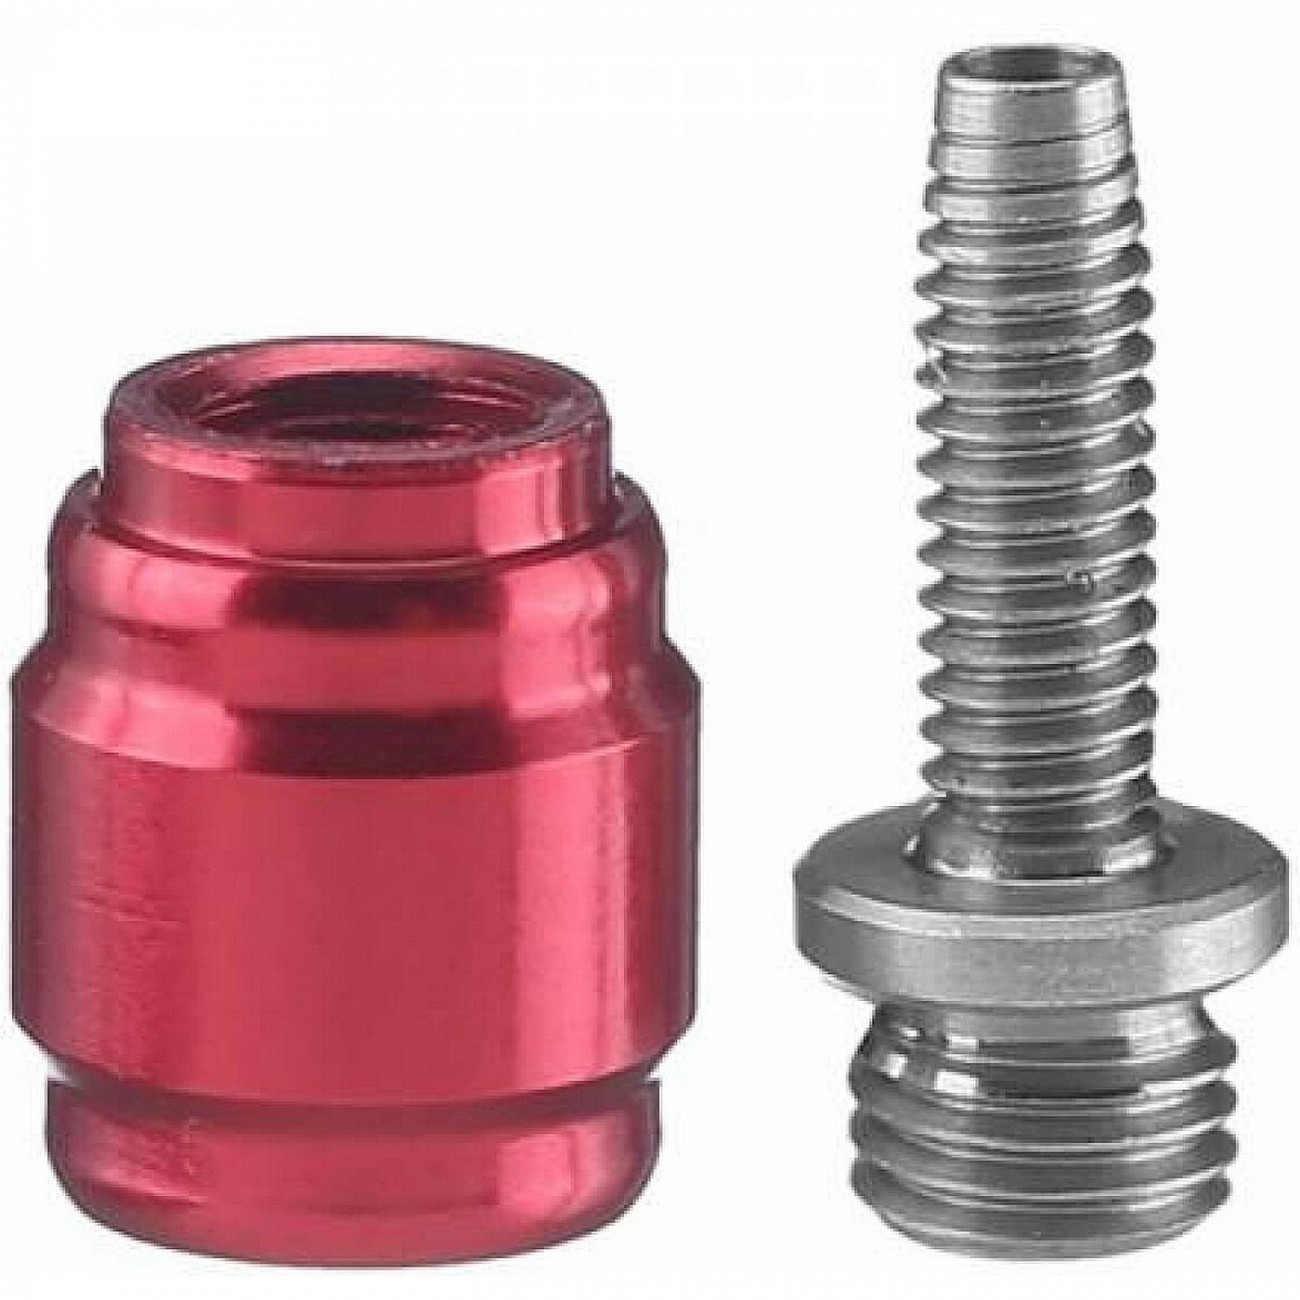 Disc brake hose fitting kit - (includes 1 threaded hose barb 1 red comp fitting - 1